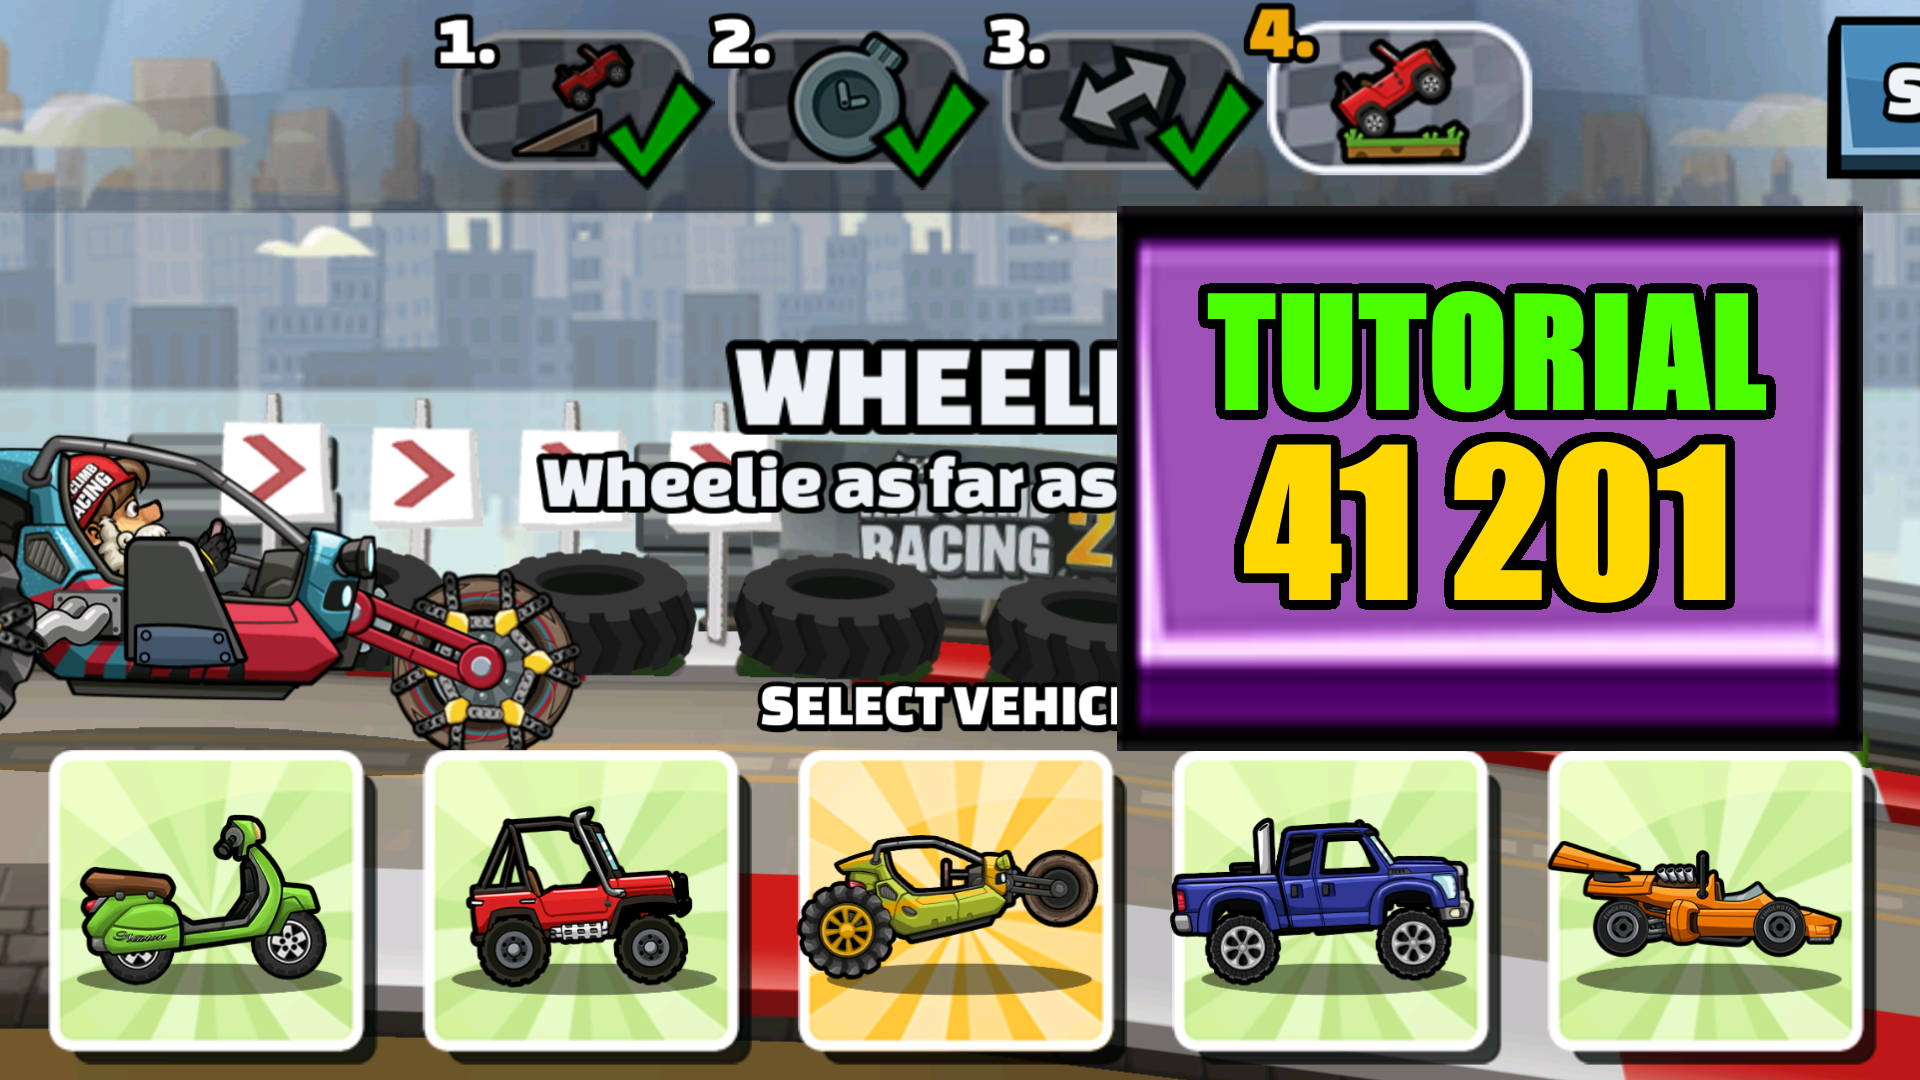 Hill Climb Racing - Oh, what a lovely day! Zephyr Thunder-Skull and her  Survivor Chopper skin will be out today in Hill Climb Racing 2!